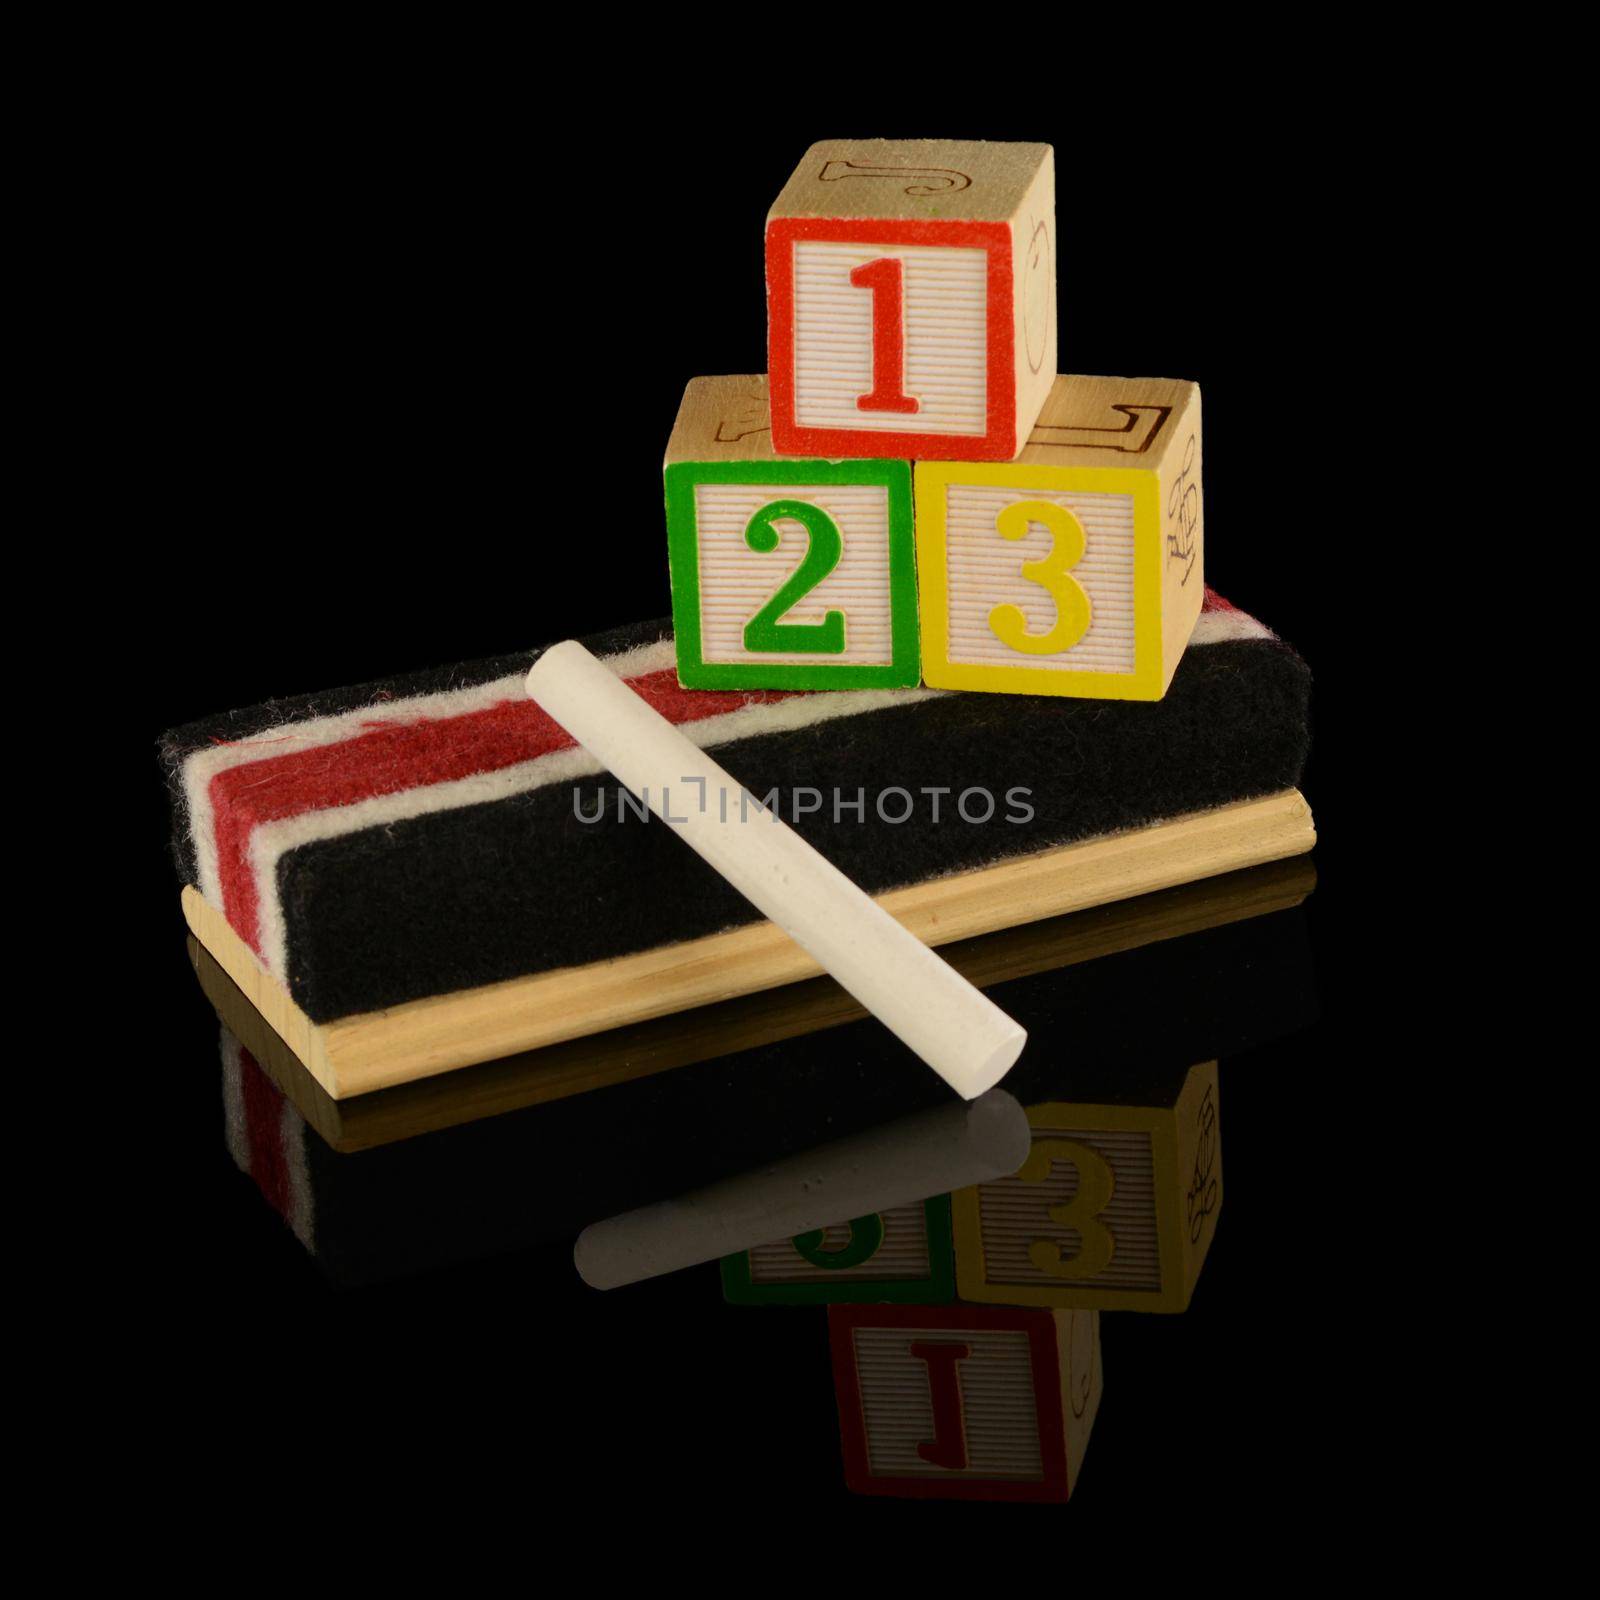 A grouping of preschool teacher items used for early childhood education over a black reflective background.